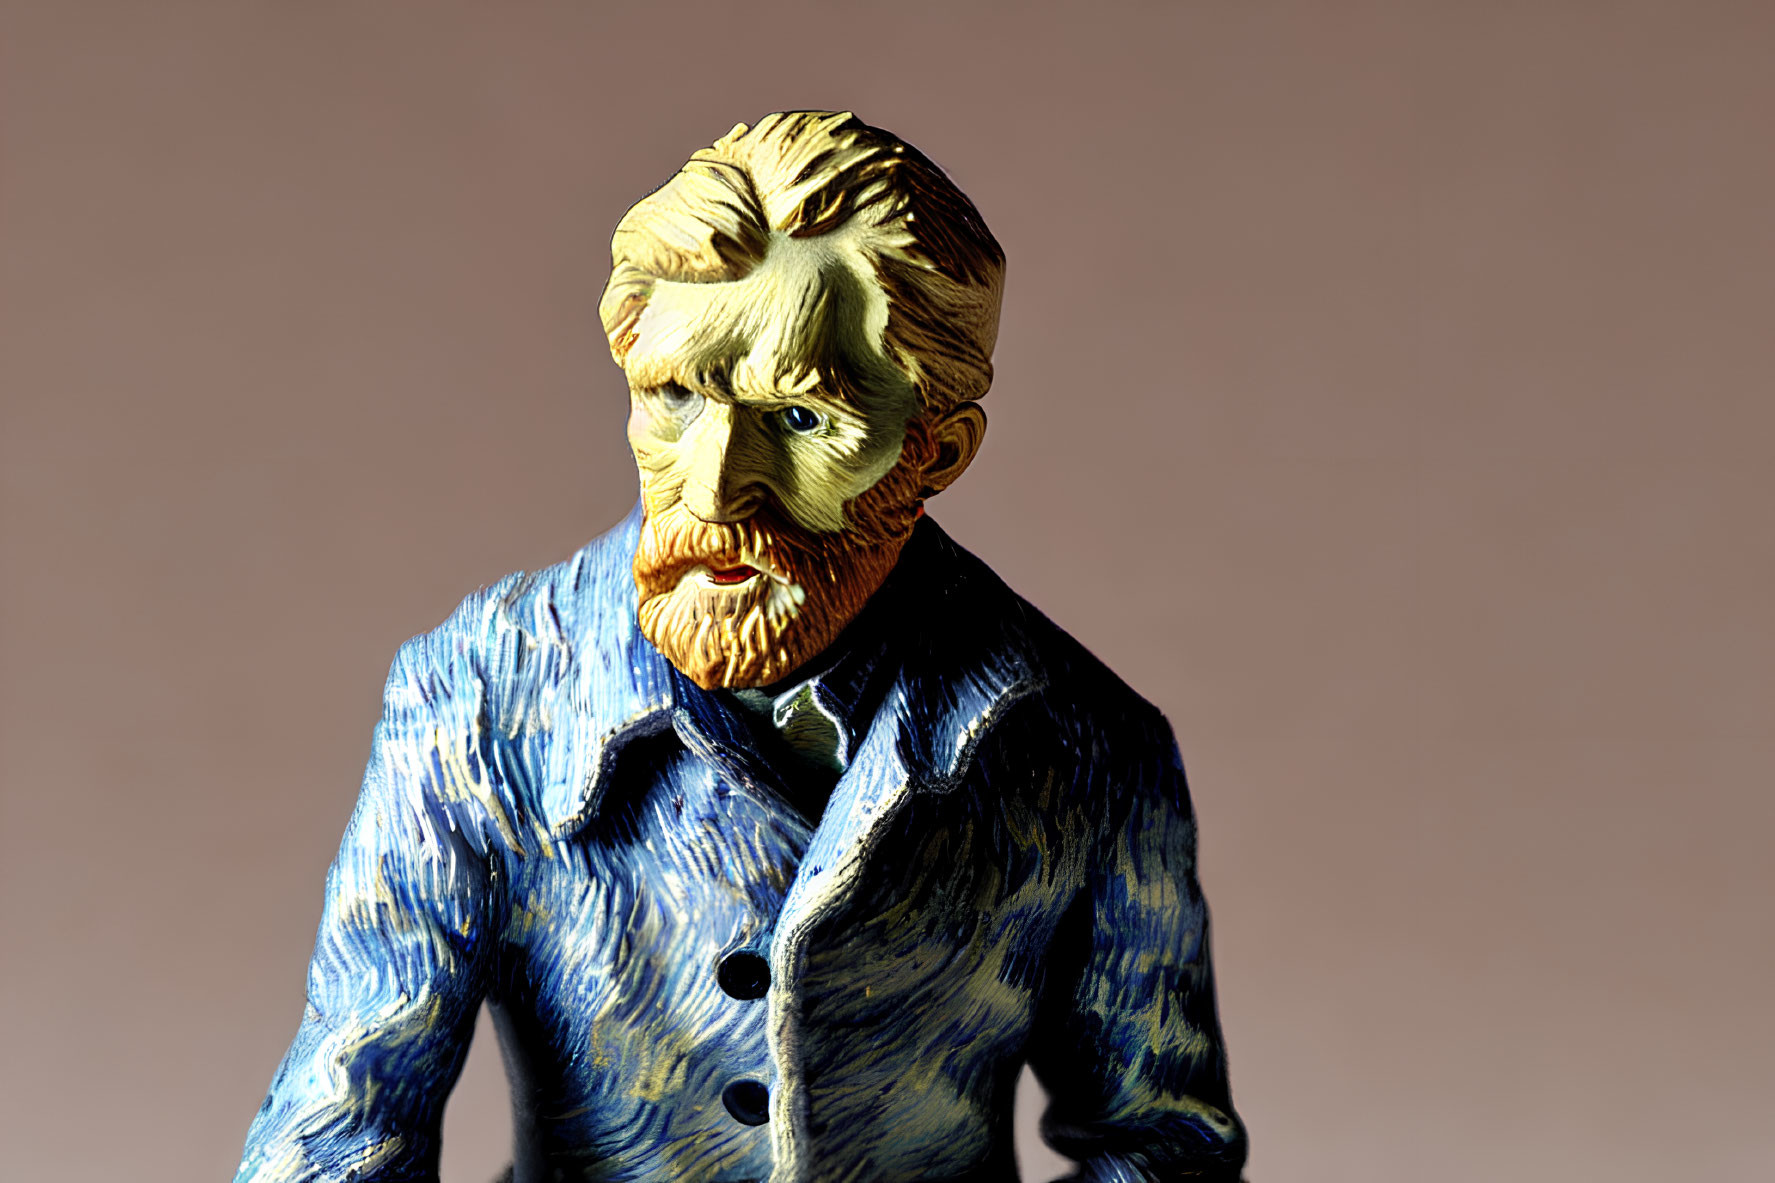 Stylized portrait of a bearded man in blue coat with yellow hair, against plain backdrop